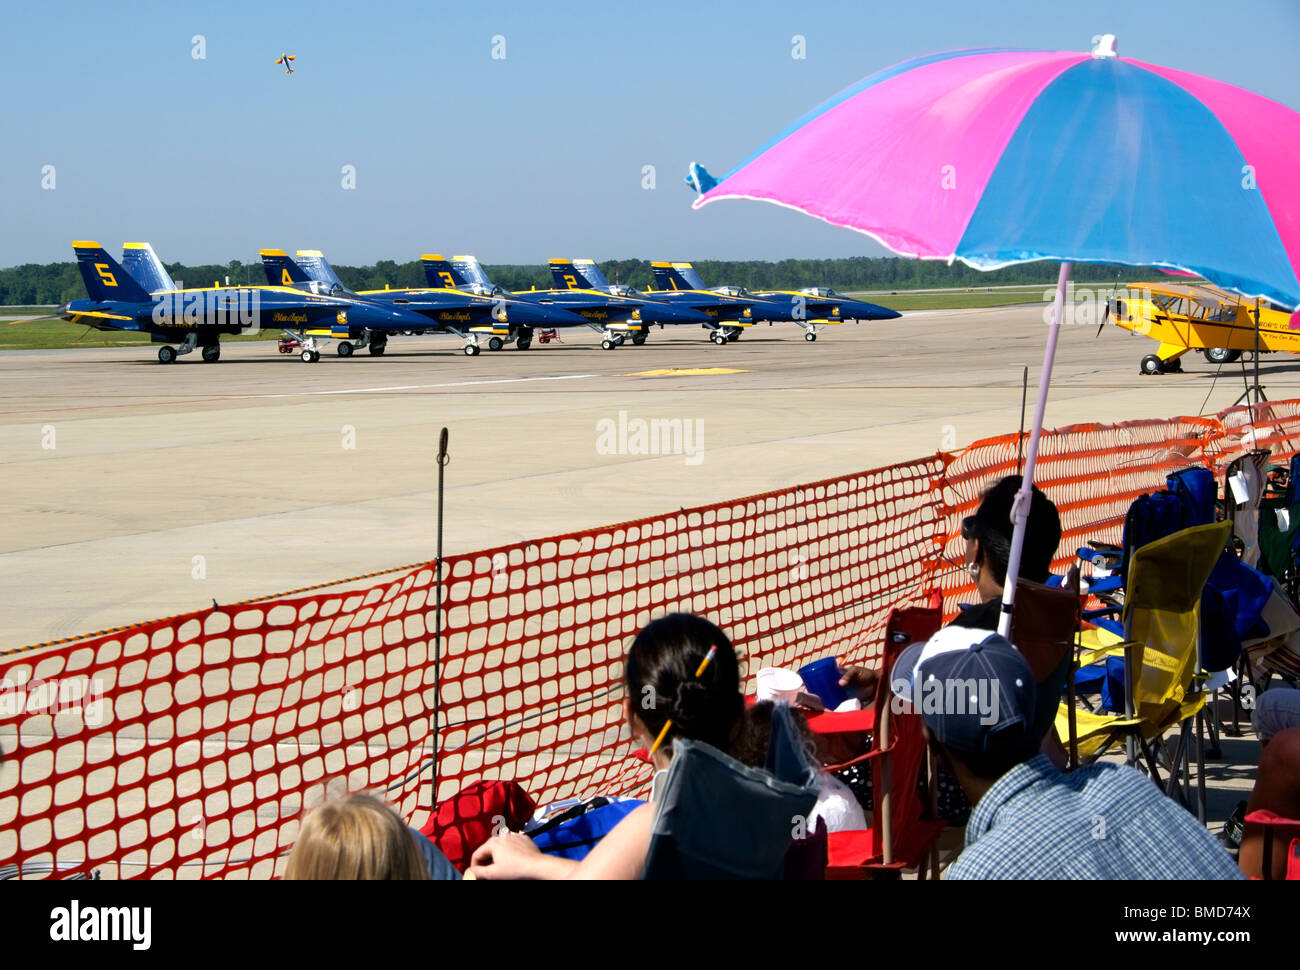 Spectators watching airshow and waiting for the Blue Angels to perform Stock Photo